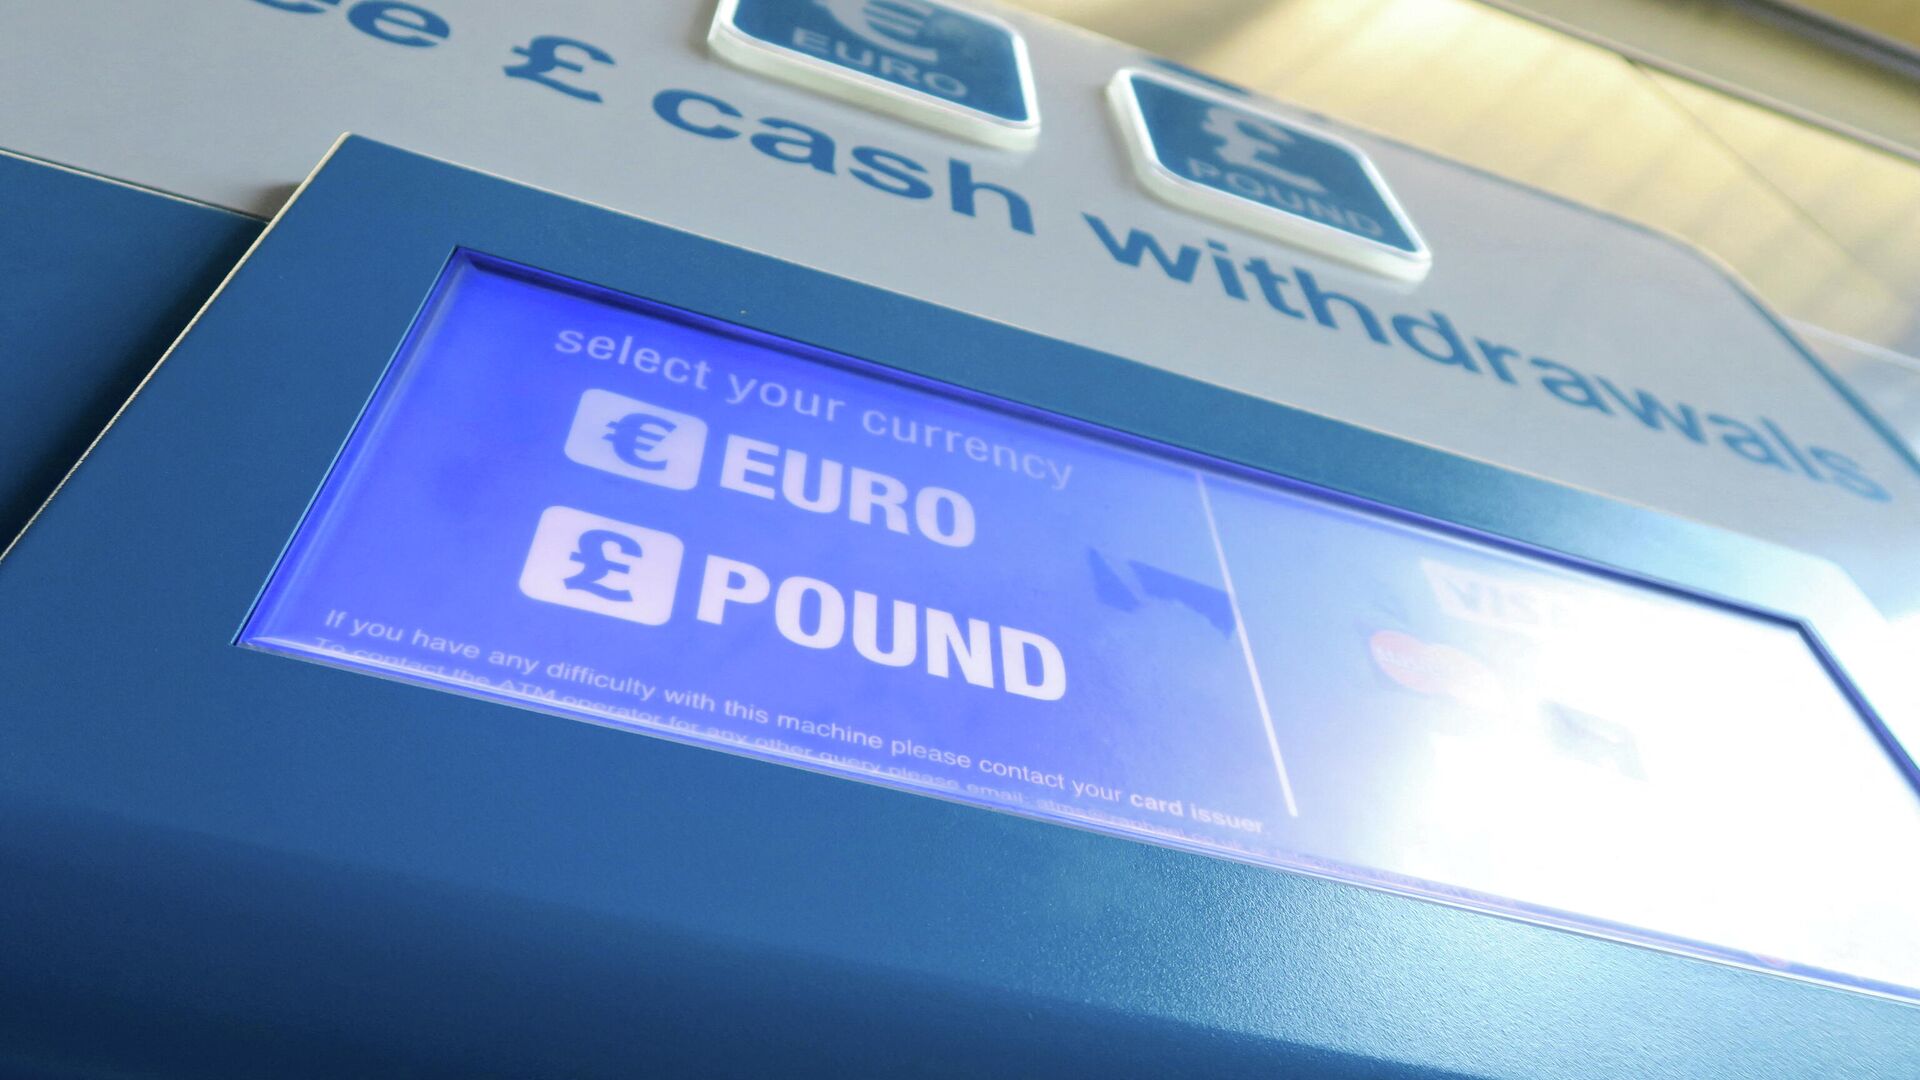 A cash machine ATM that offers withdrawals in either Pound Sterling or Euros is seen in Canary Wharf Financial centre in London, Britain, June 30, 2016. - Sputnik International, 1920, 27.02.2022